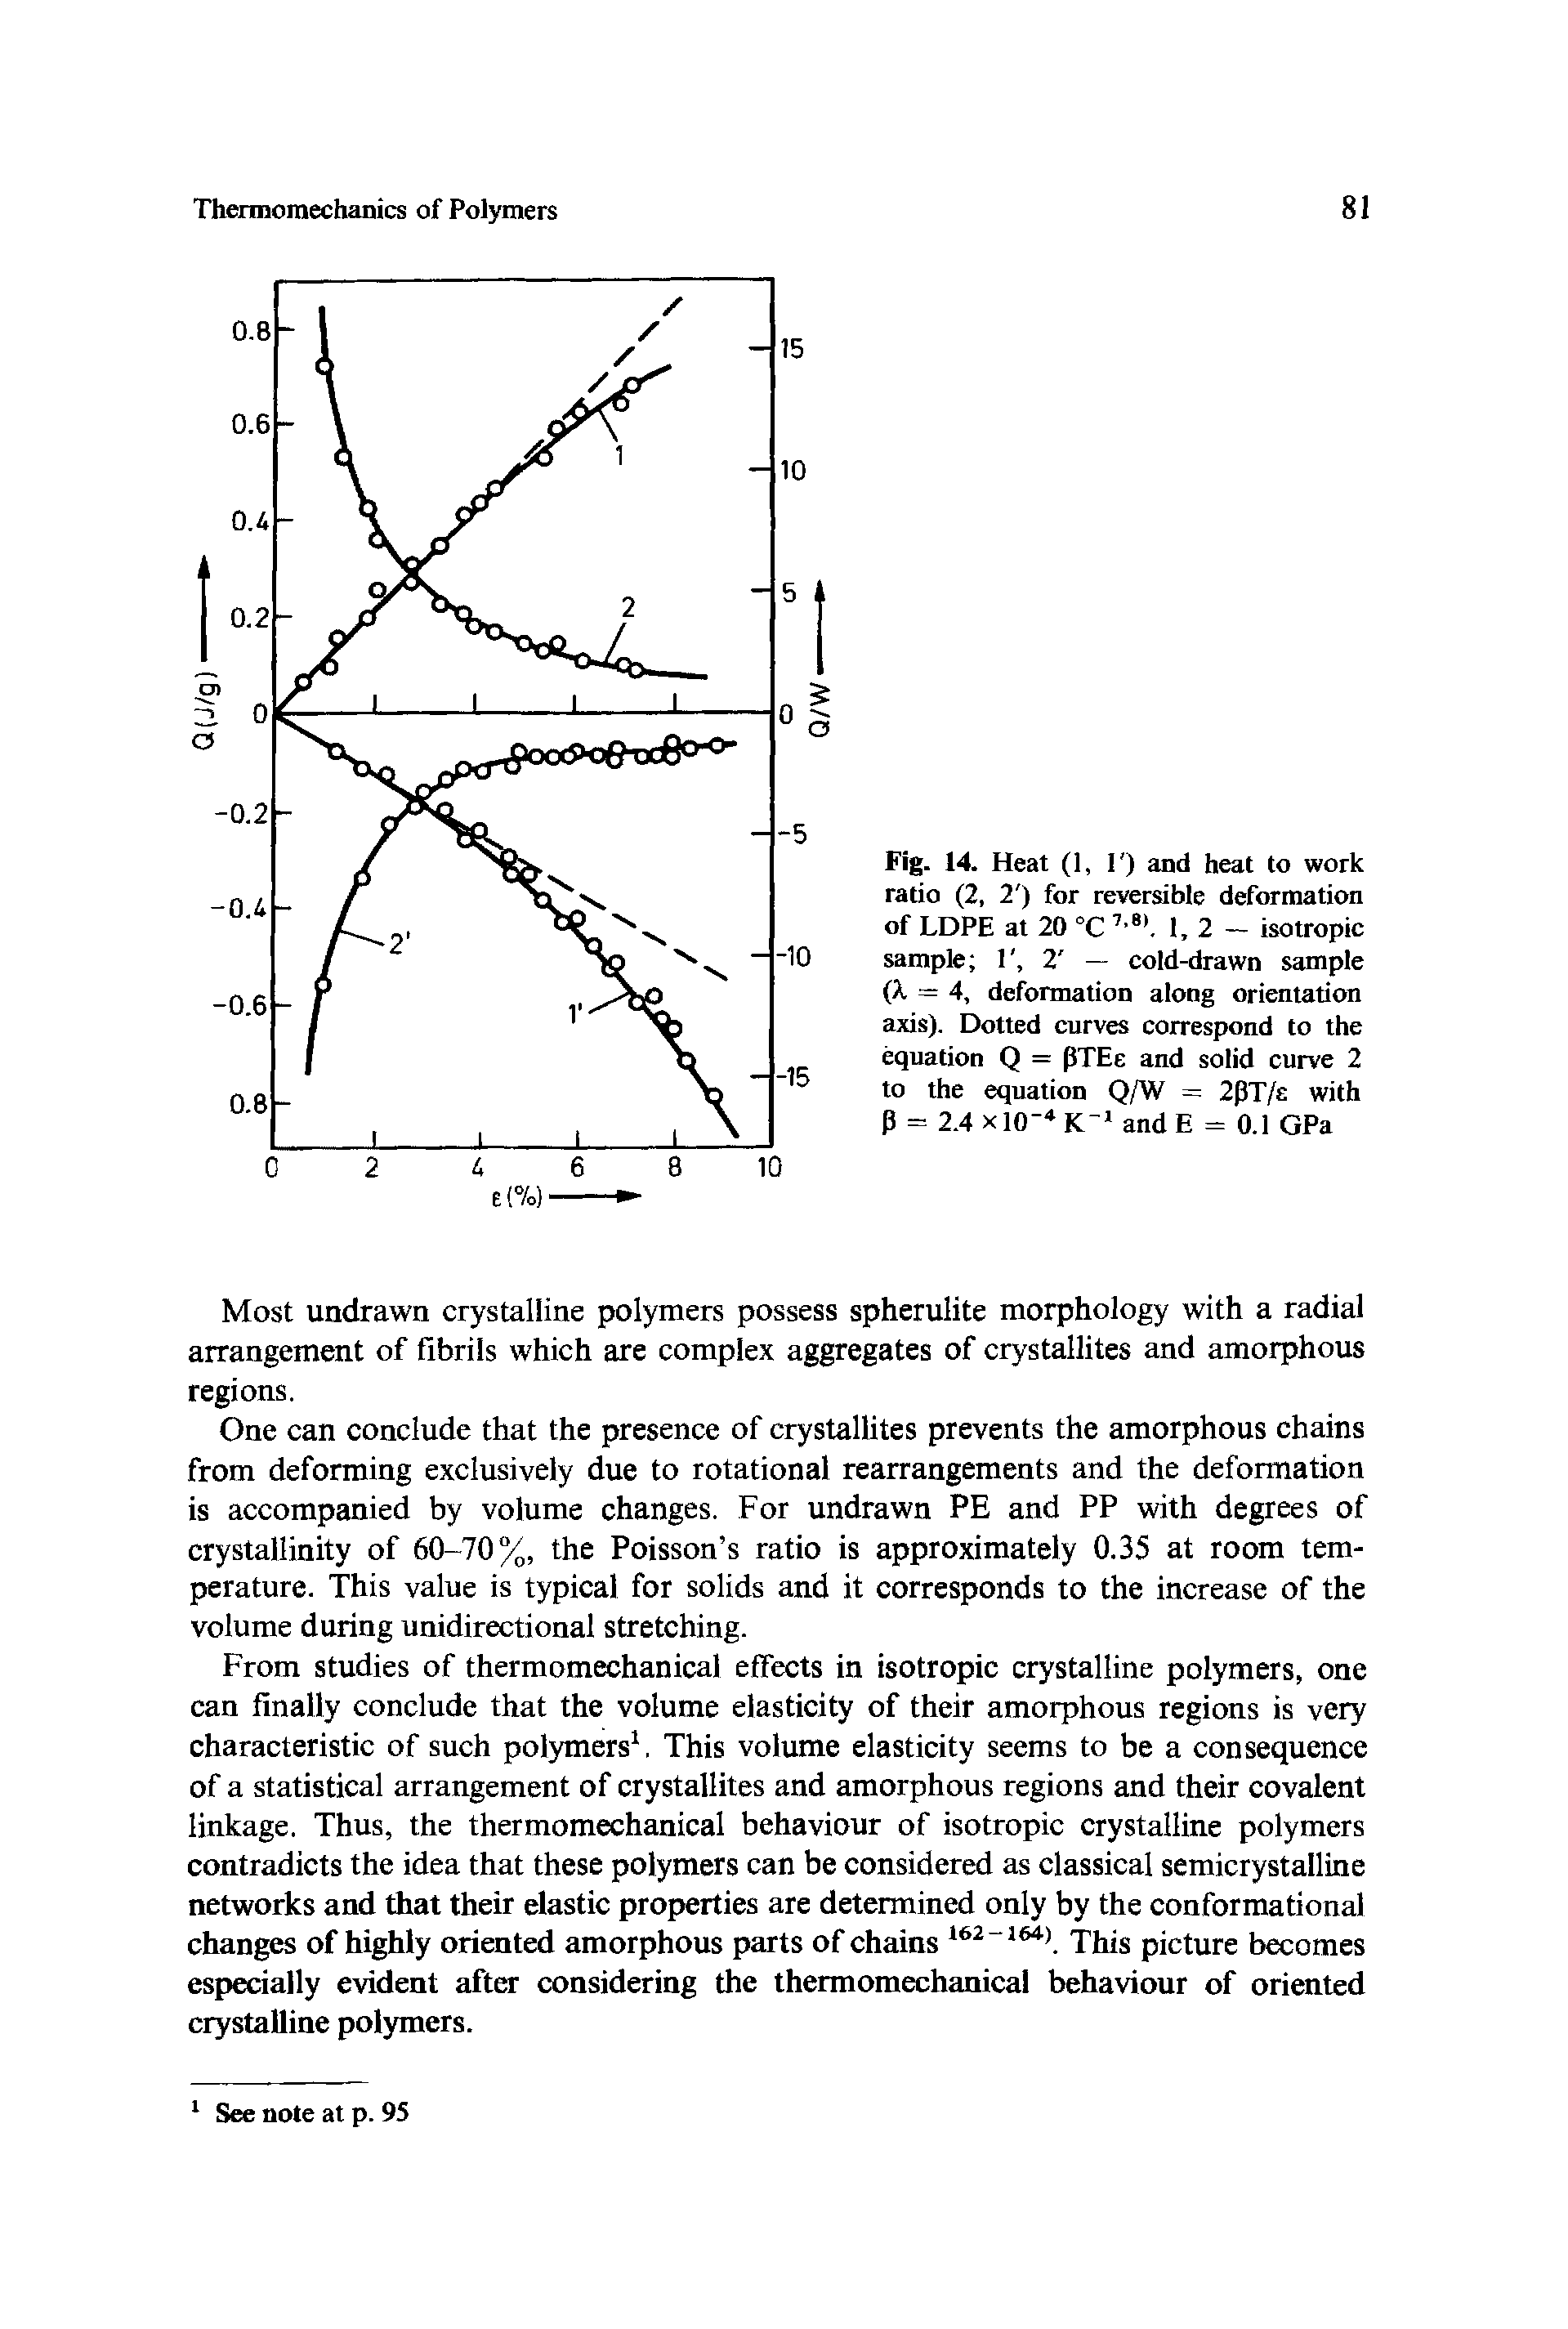 Fig. 14. Heat (1, 1 ) and heat to work ratio (2, 2 ) for reversible deformation of LDPE at 20 °C 7 81. 1,2 — isotropic sample 1, 2 — cold-drawn sample (A. = 4, deformation along orientation axis). Dotted curves correspond to the equation Q = fiTEe and solid curve 2 to the equation Q/W = 2PT/c with P = 2.4 x 10"4 K 1 and E = 0.1 GPa...